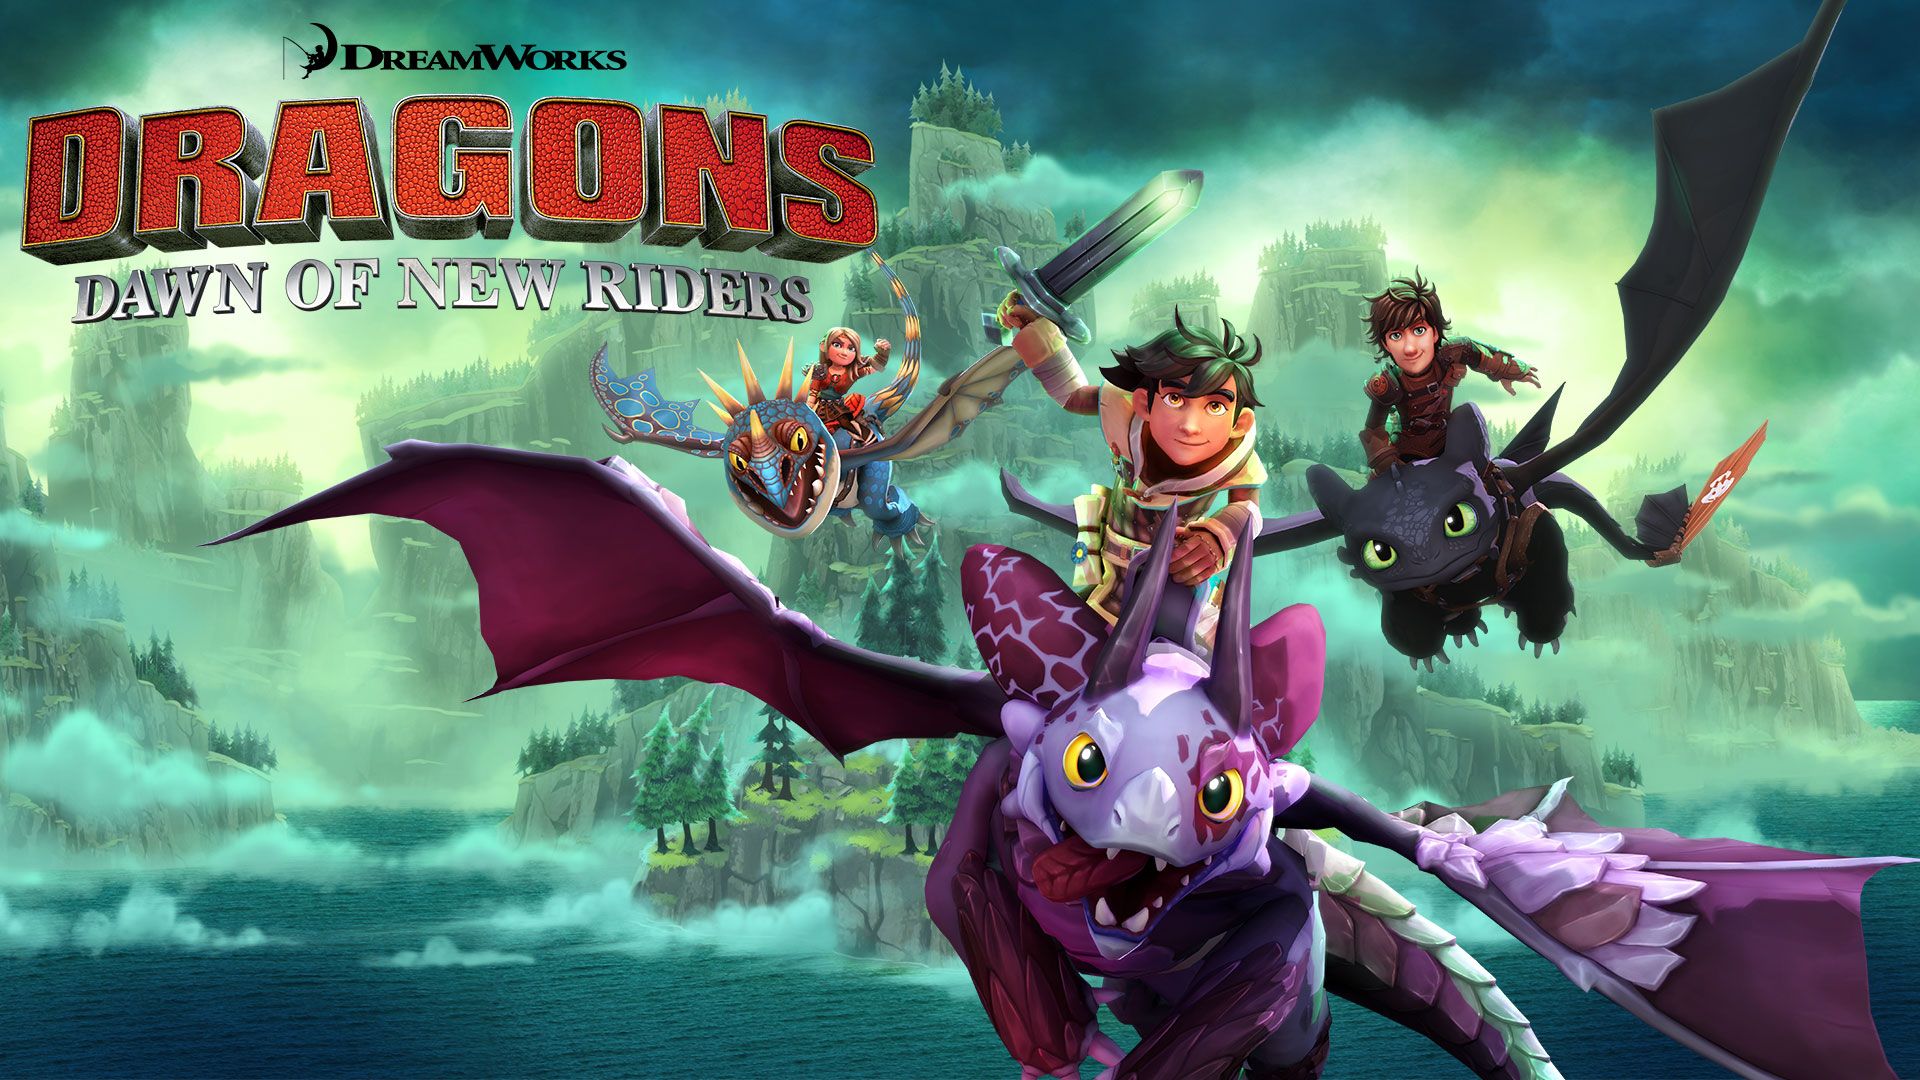 DreamWorks Dragons Dawn of New Riders for Nintendo Switch Game Details